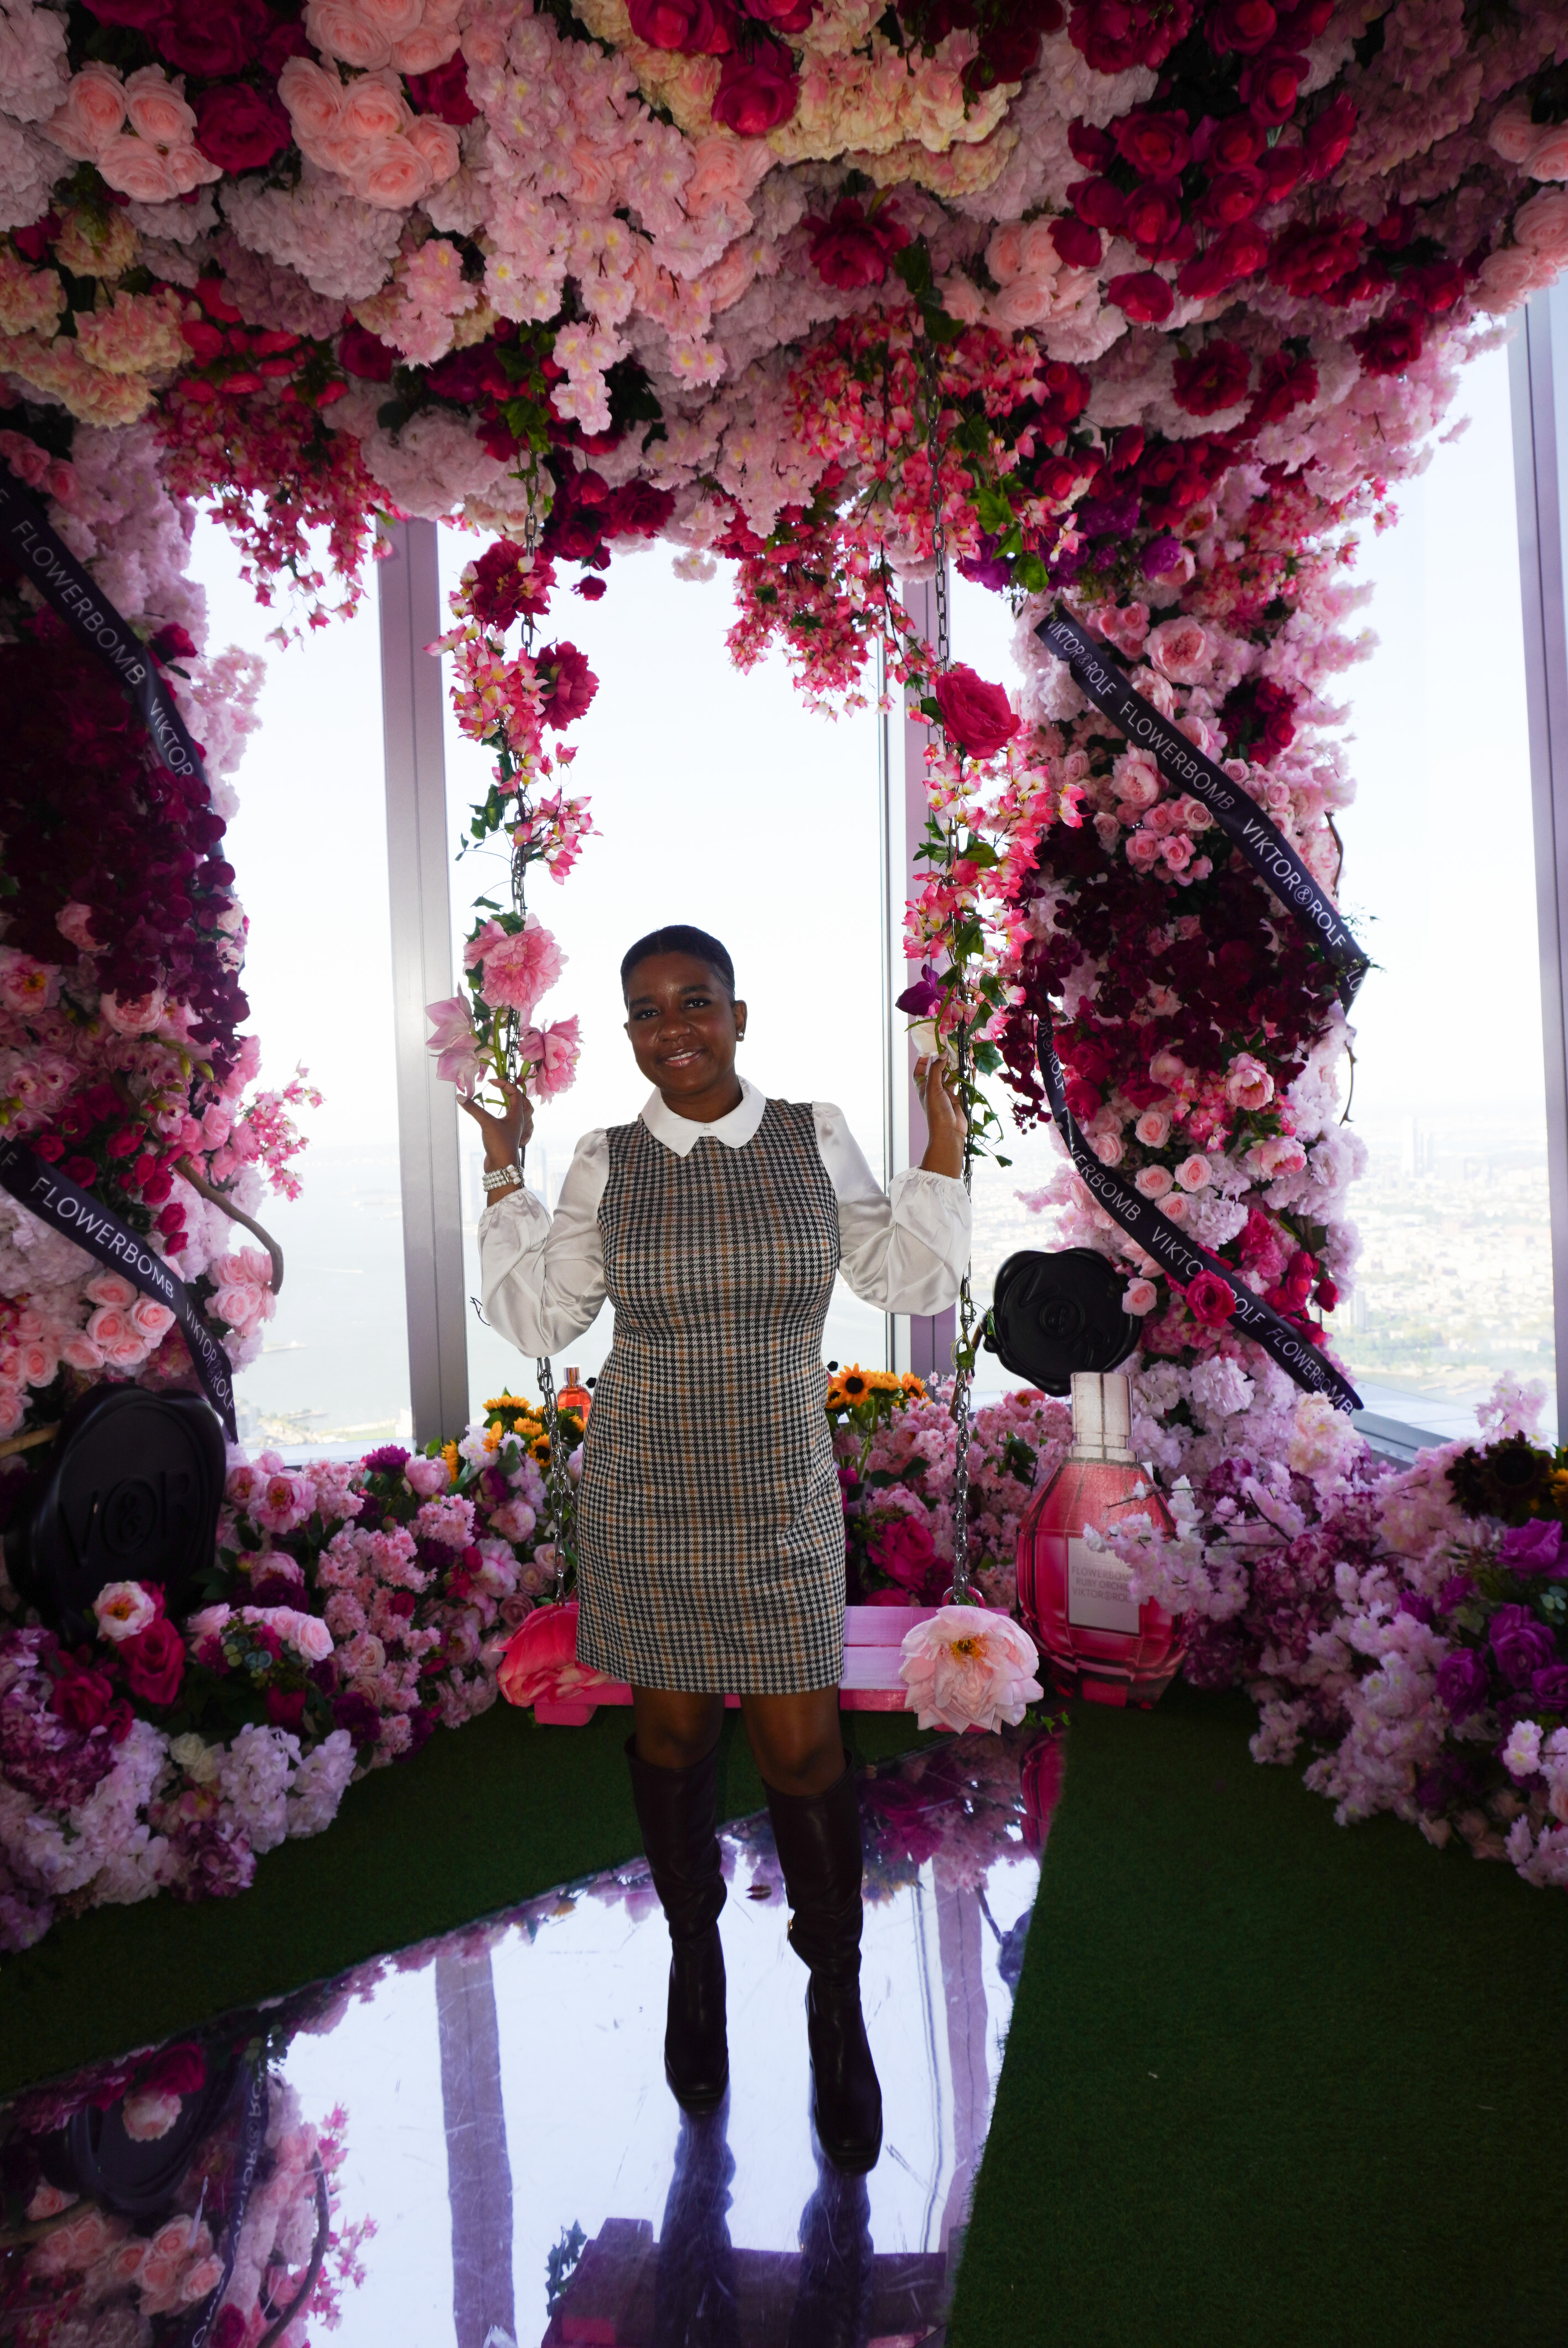 Image of me standing in front of the Viktor & Rolf flower photo-op space.